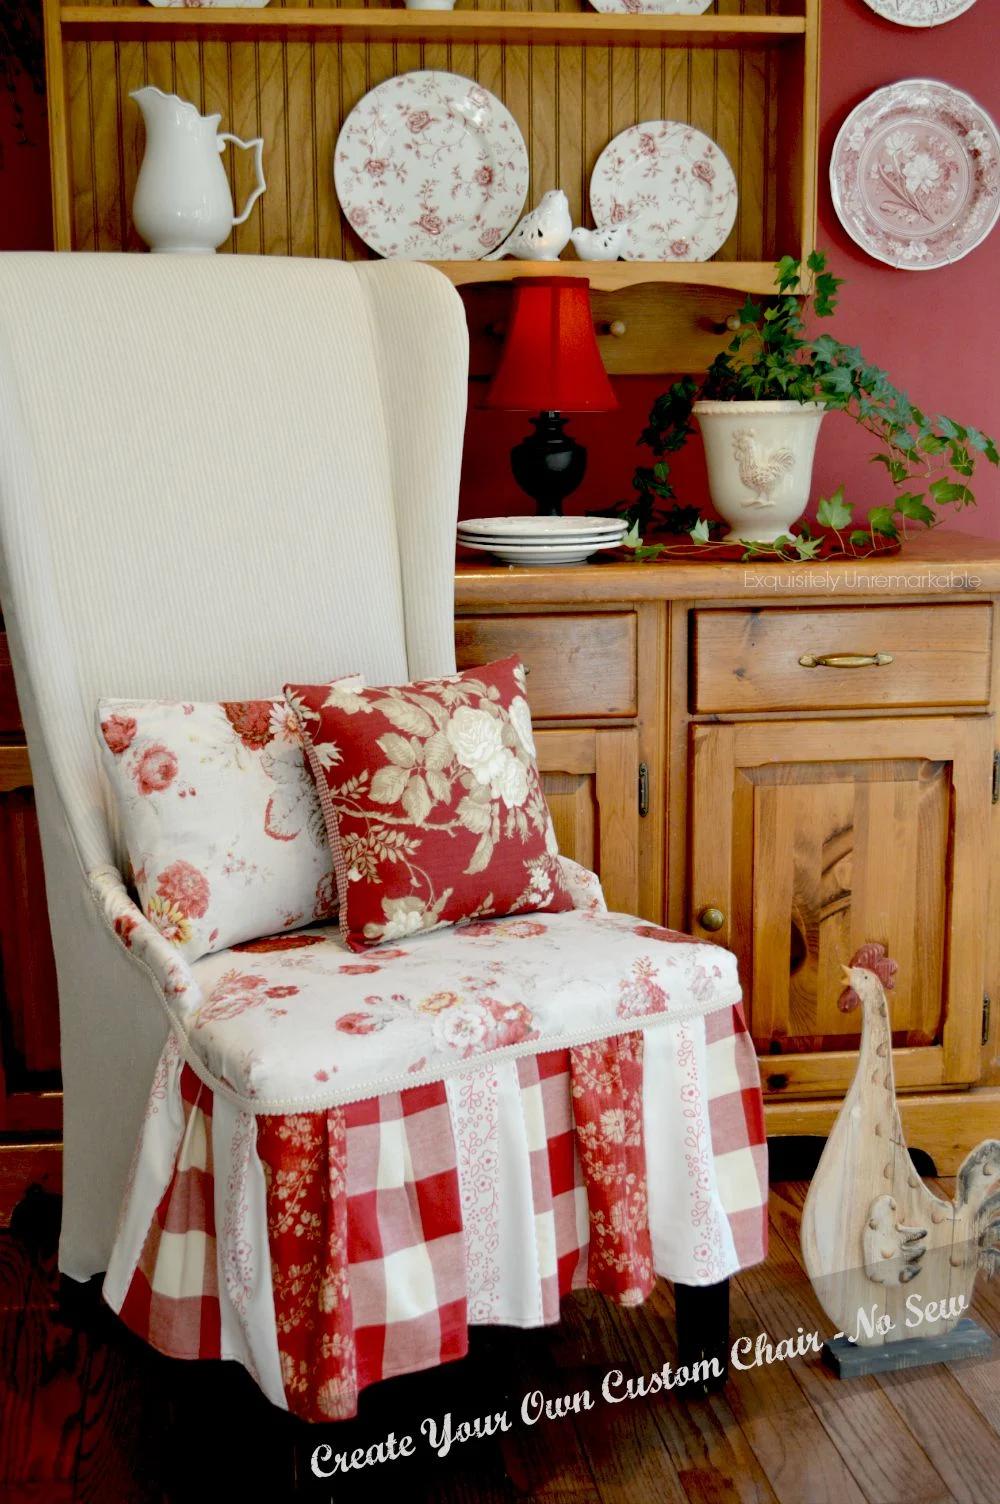 No Sew Reupholstered Chair